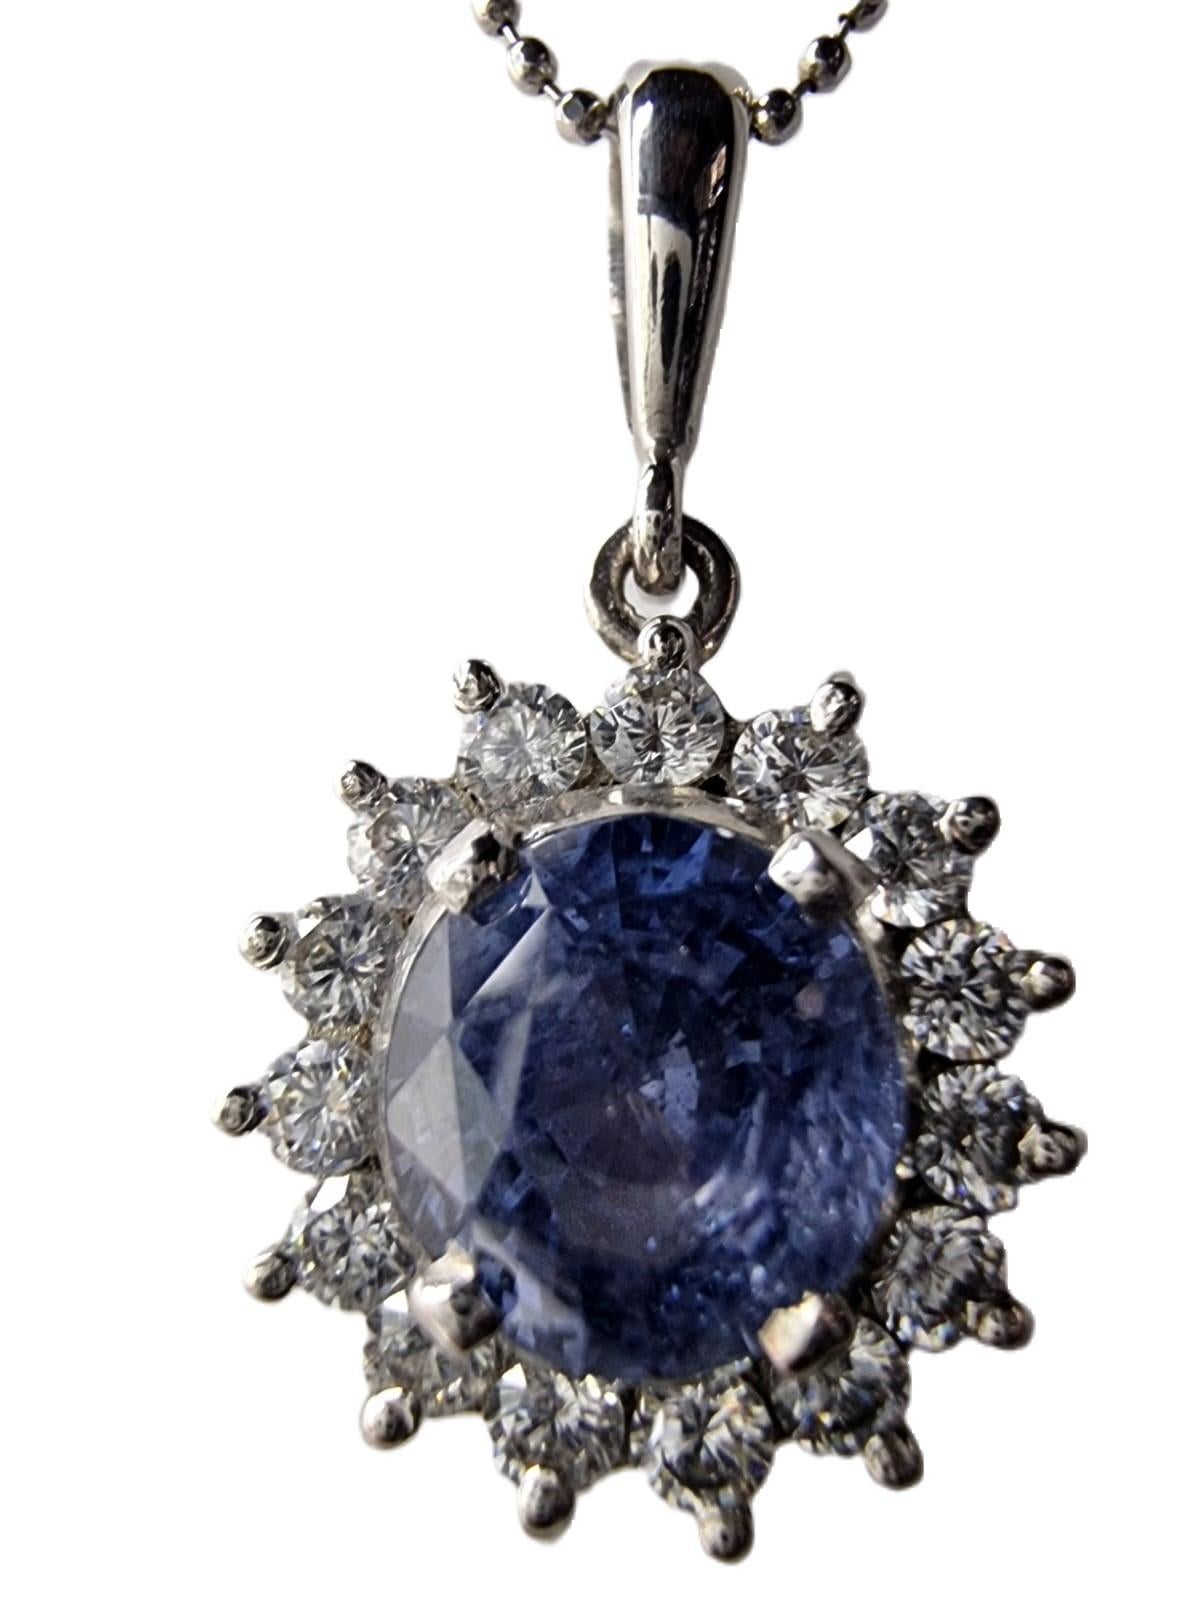 Feast your eyes on Hannaboya's  stunning 3ct Round Cut Natural Blue Sapphire Pendant Necklace, a true embodiment of timeless beauty and elegance. This remarkable pendant features a genuine 3-carat round-cut blue sapphire at its heart, measuring 9mm